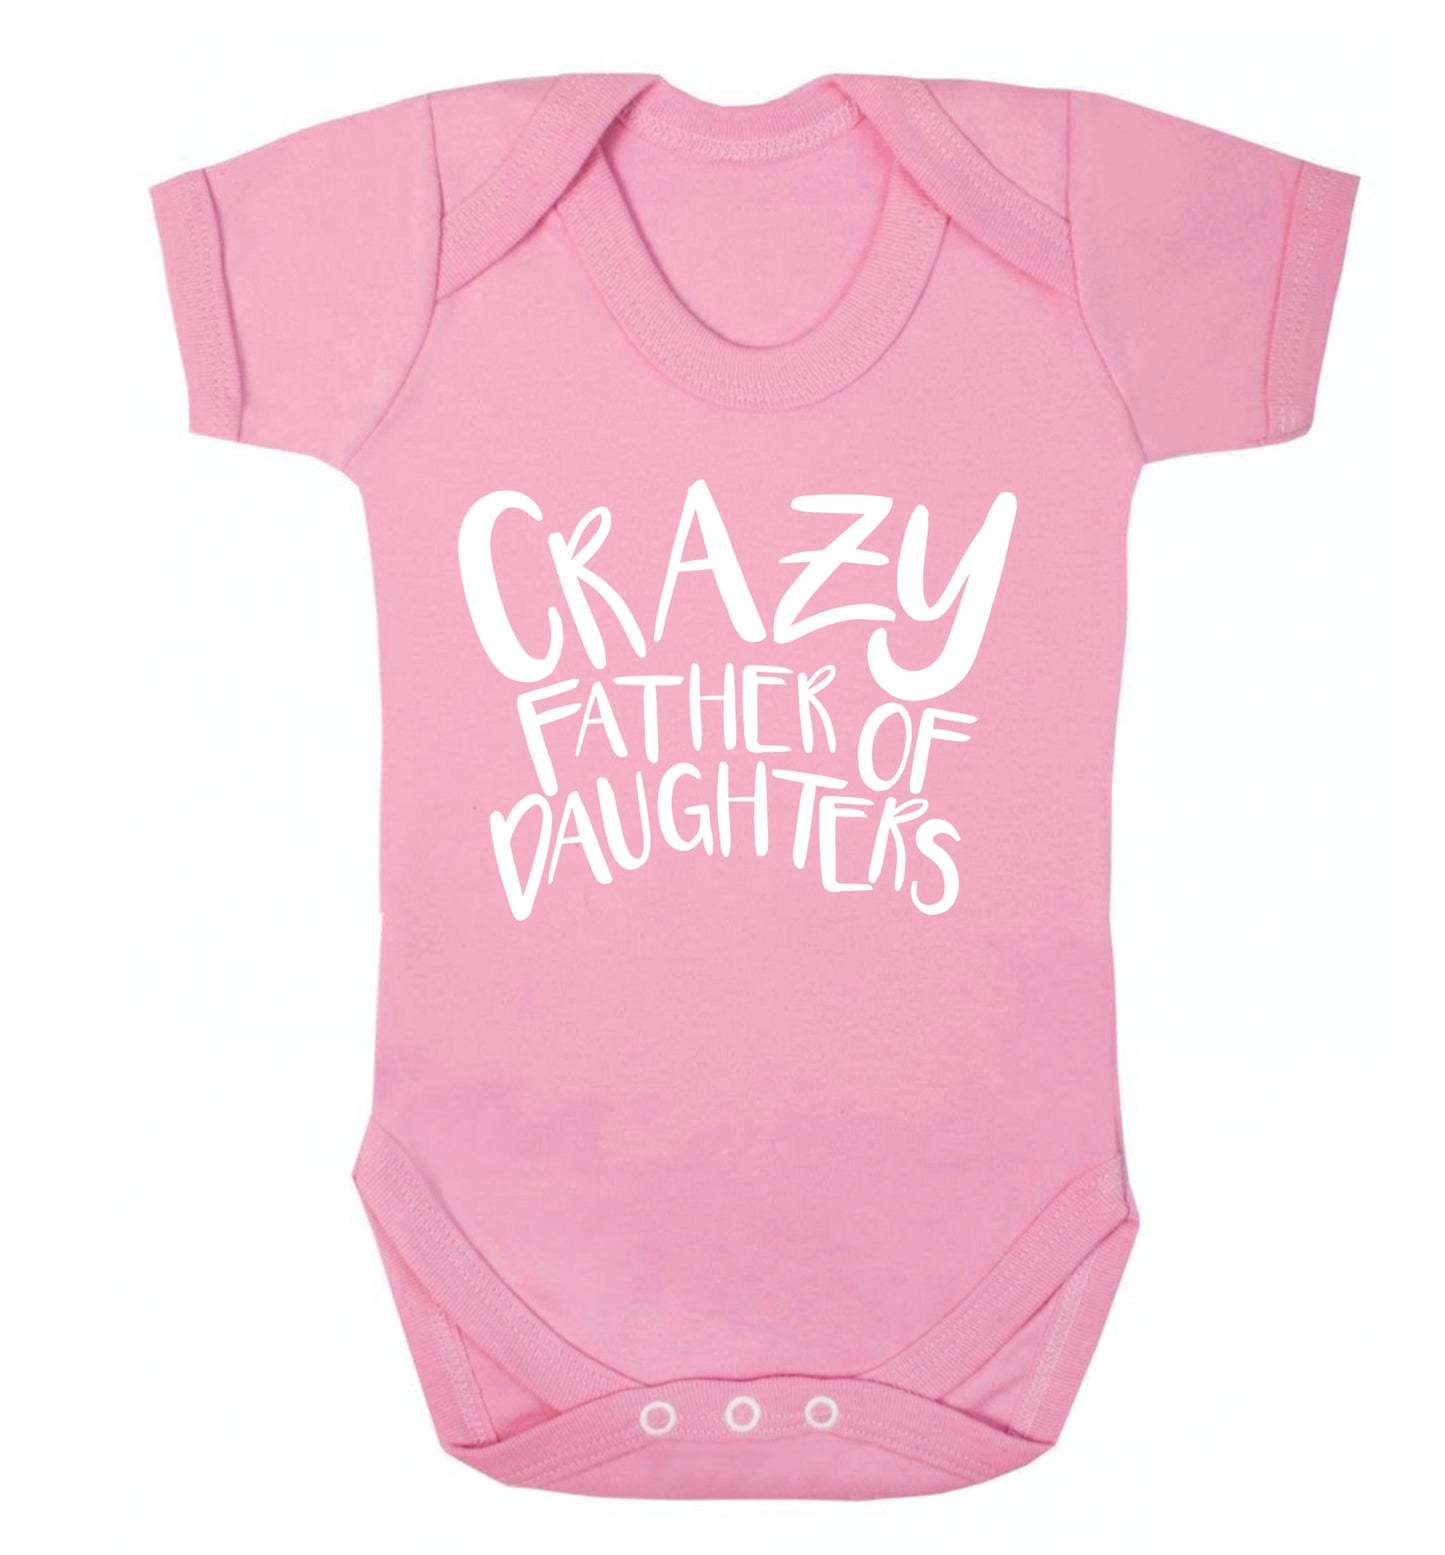 Crazy father of daughters Baby Vest pale pink 18-24 months